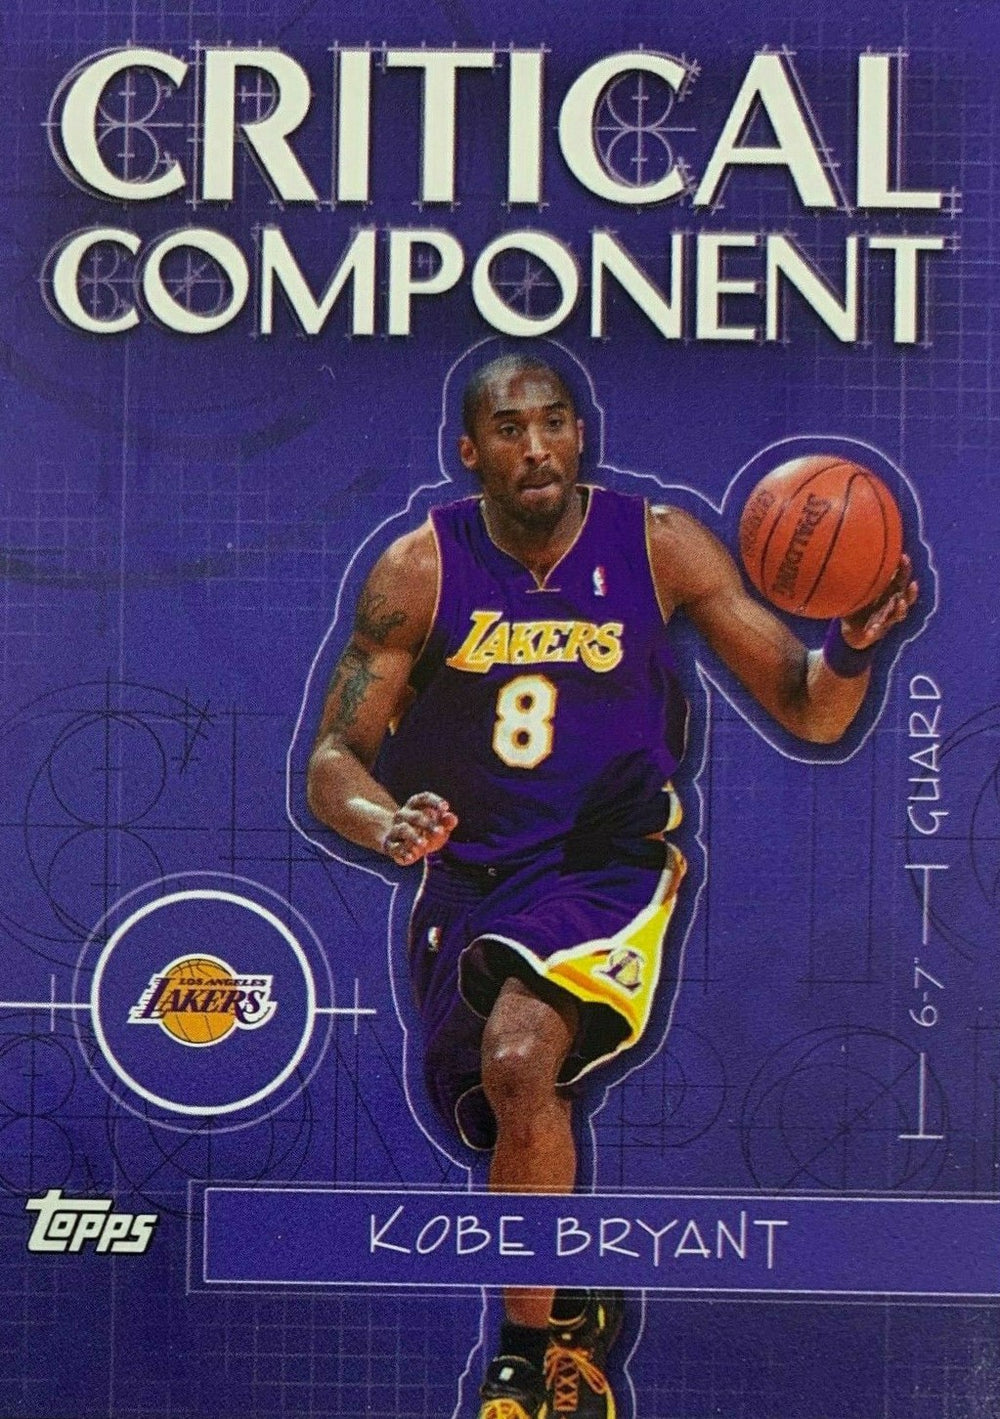 2005 2006 Topps Critical Component Insert Set with Kobe Bryant Plus